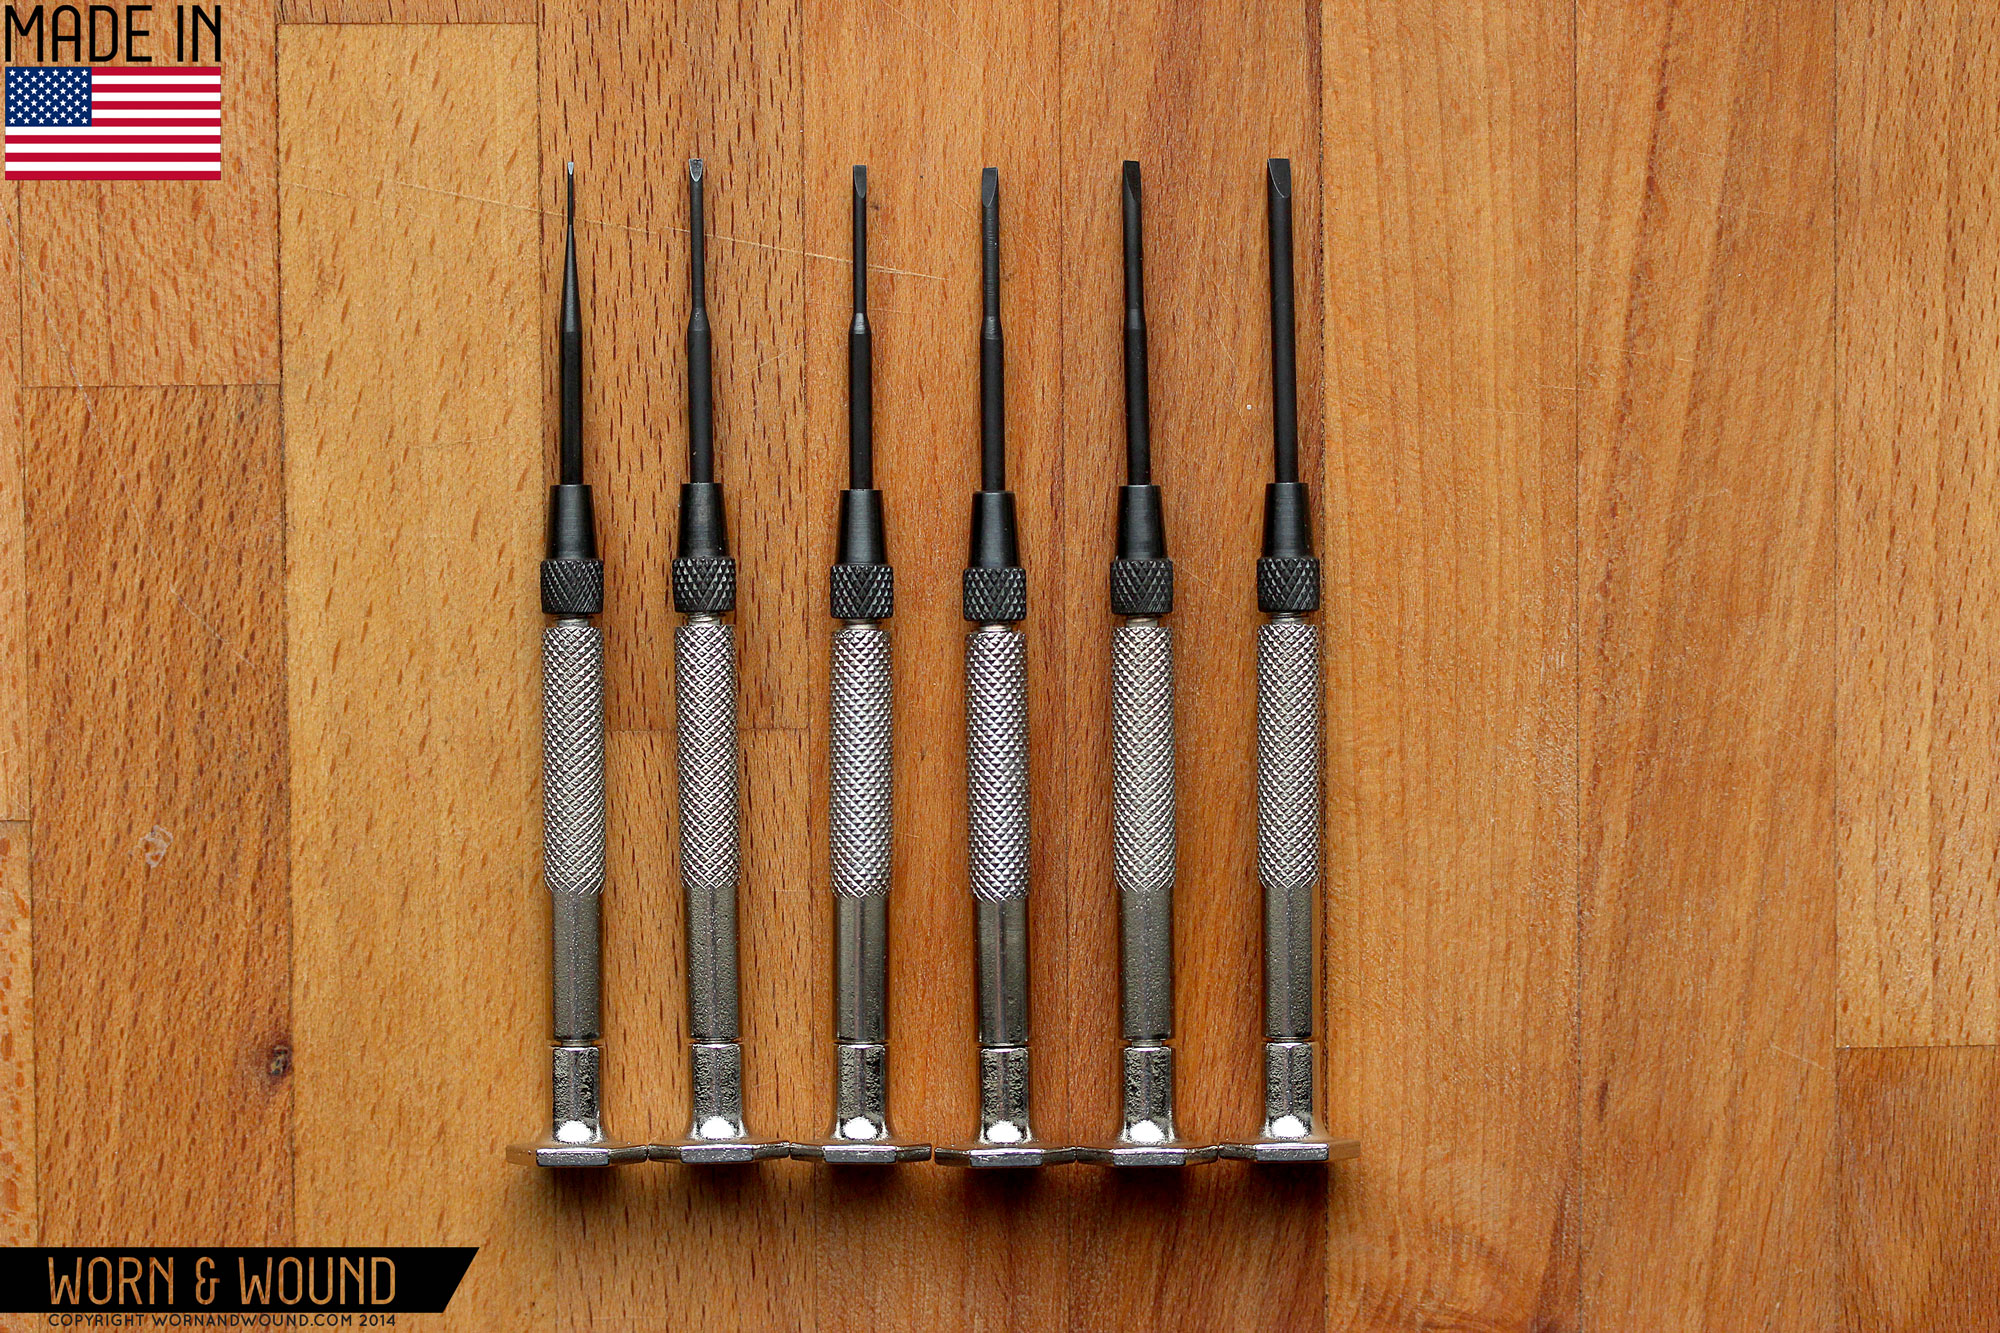 Introducing Moody Tools Screwdrivers to the w&w Shop - Worn & Wound